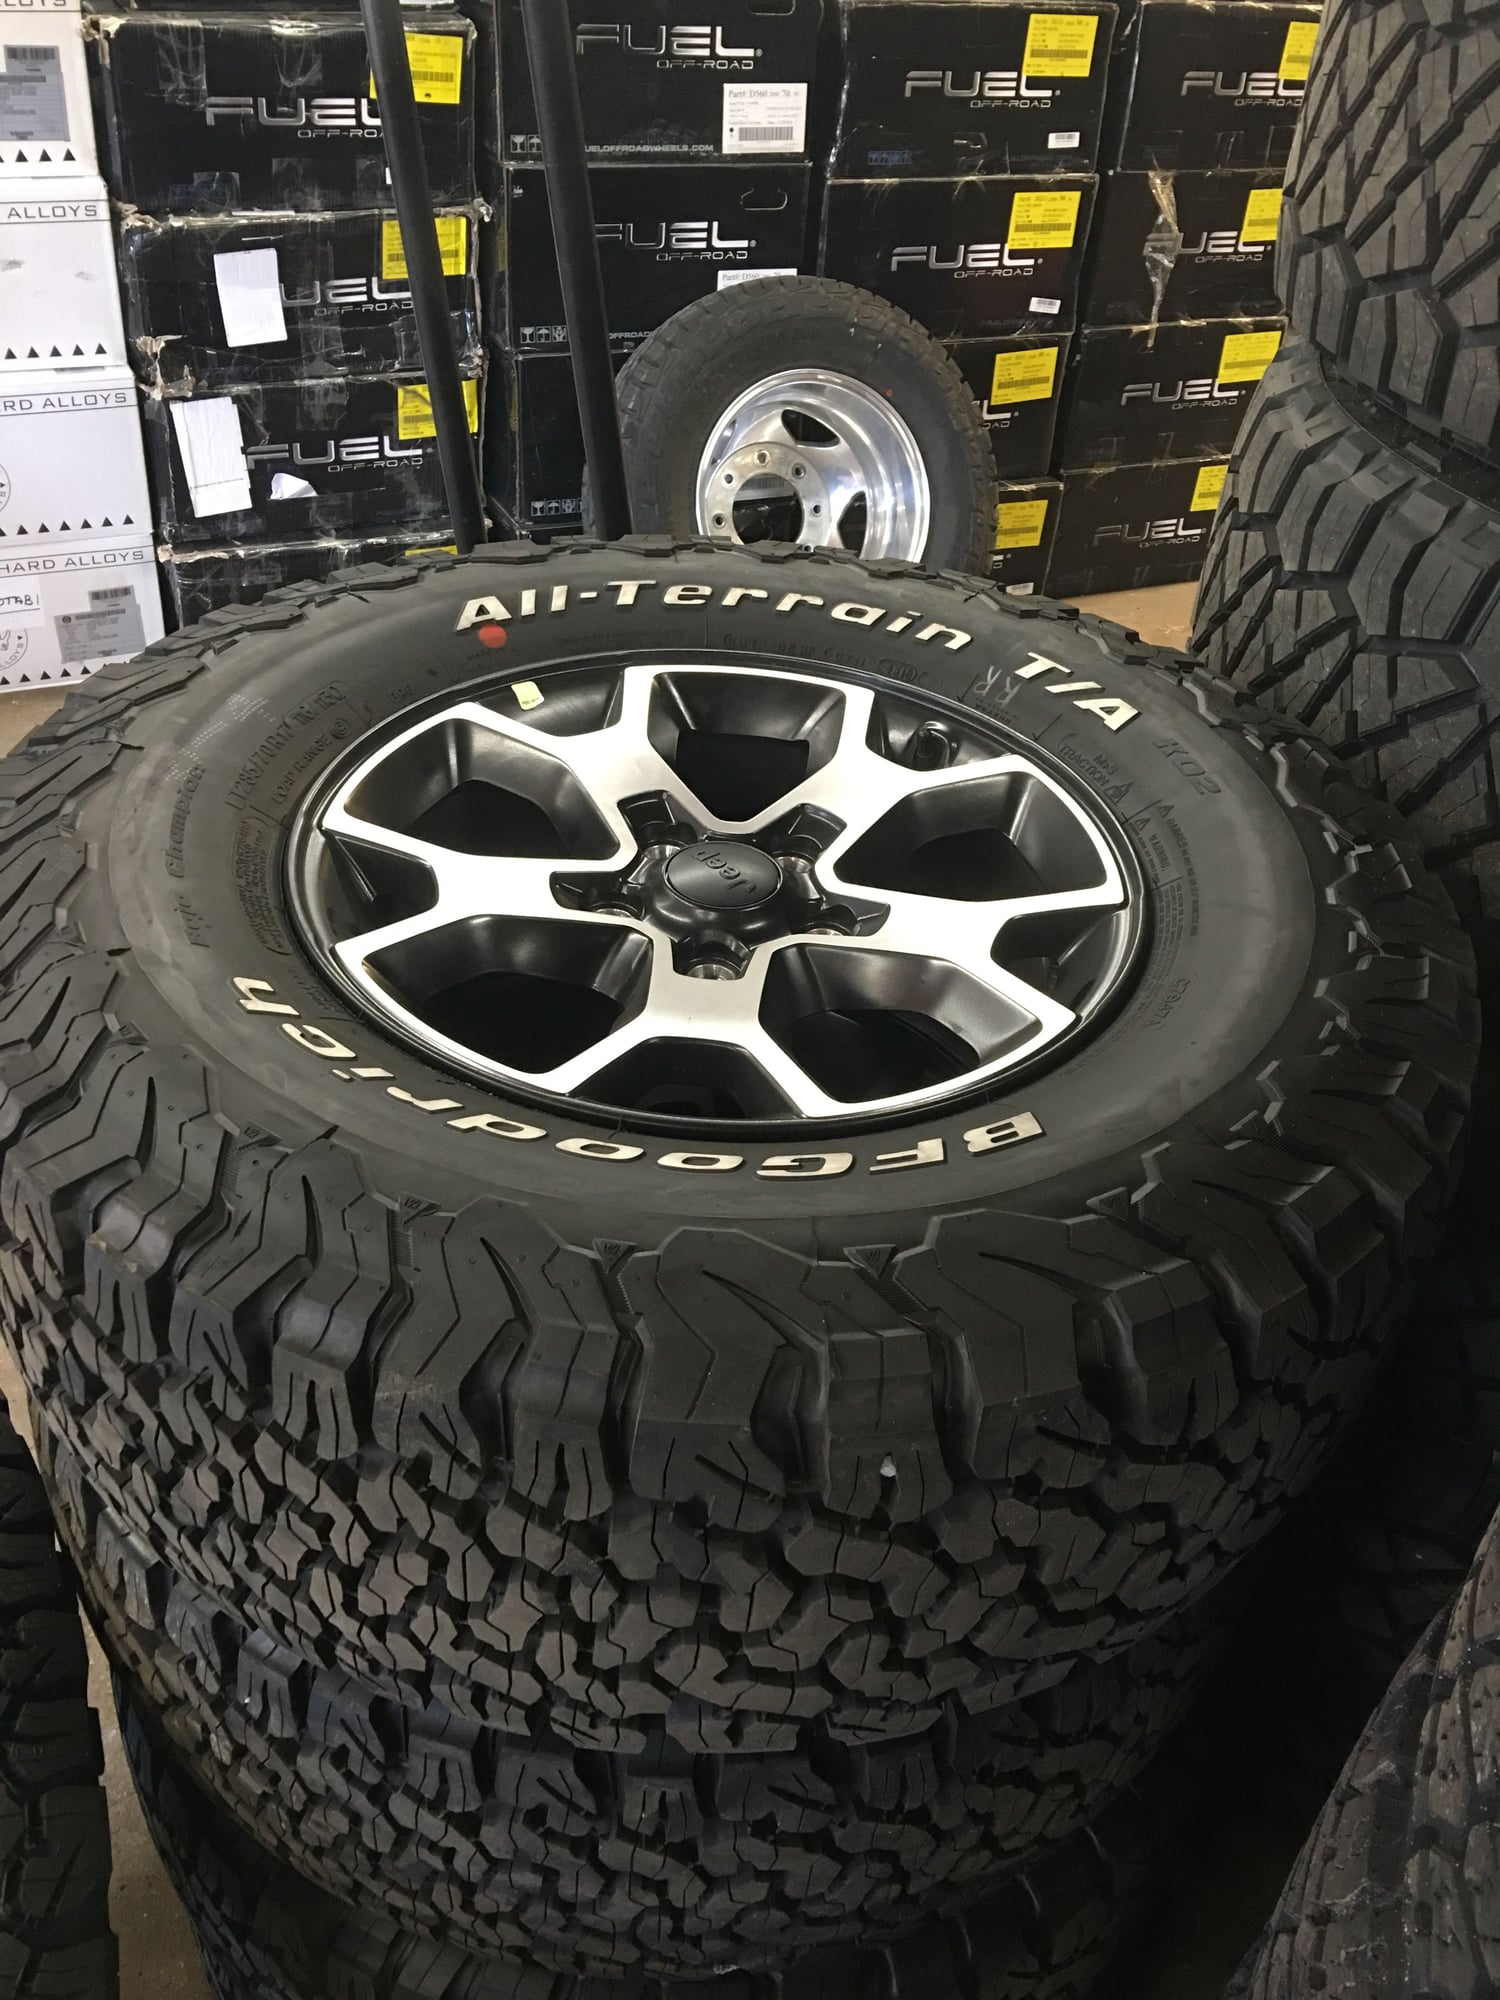 Wheels and Tires/Axles - 2019 Rubicon wheels and tires - Used - Bayport, NY 11705, United States